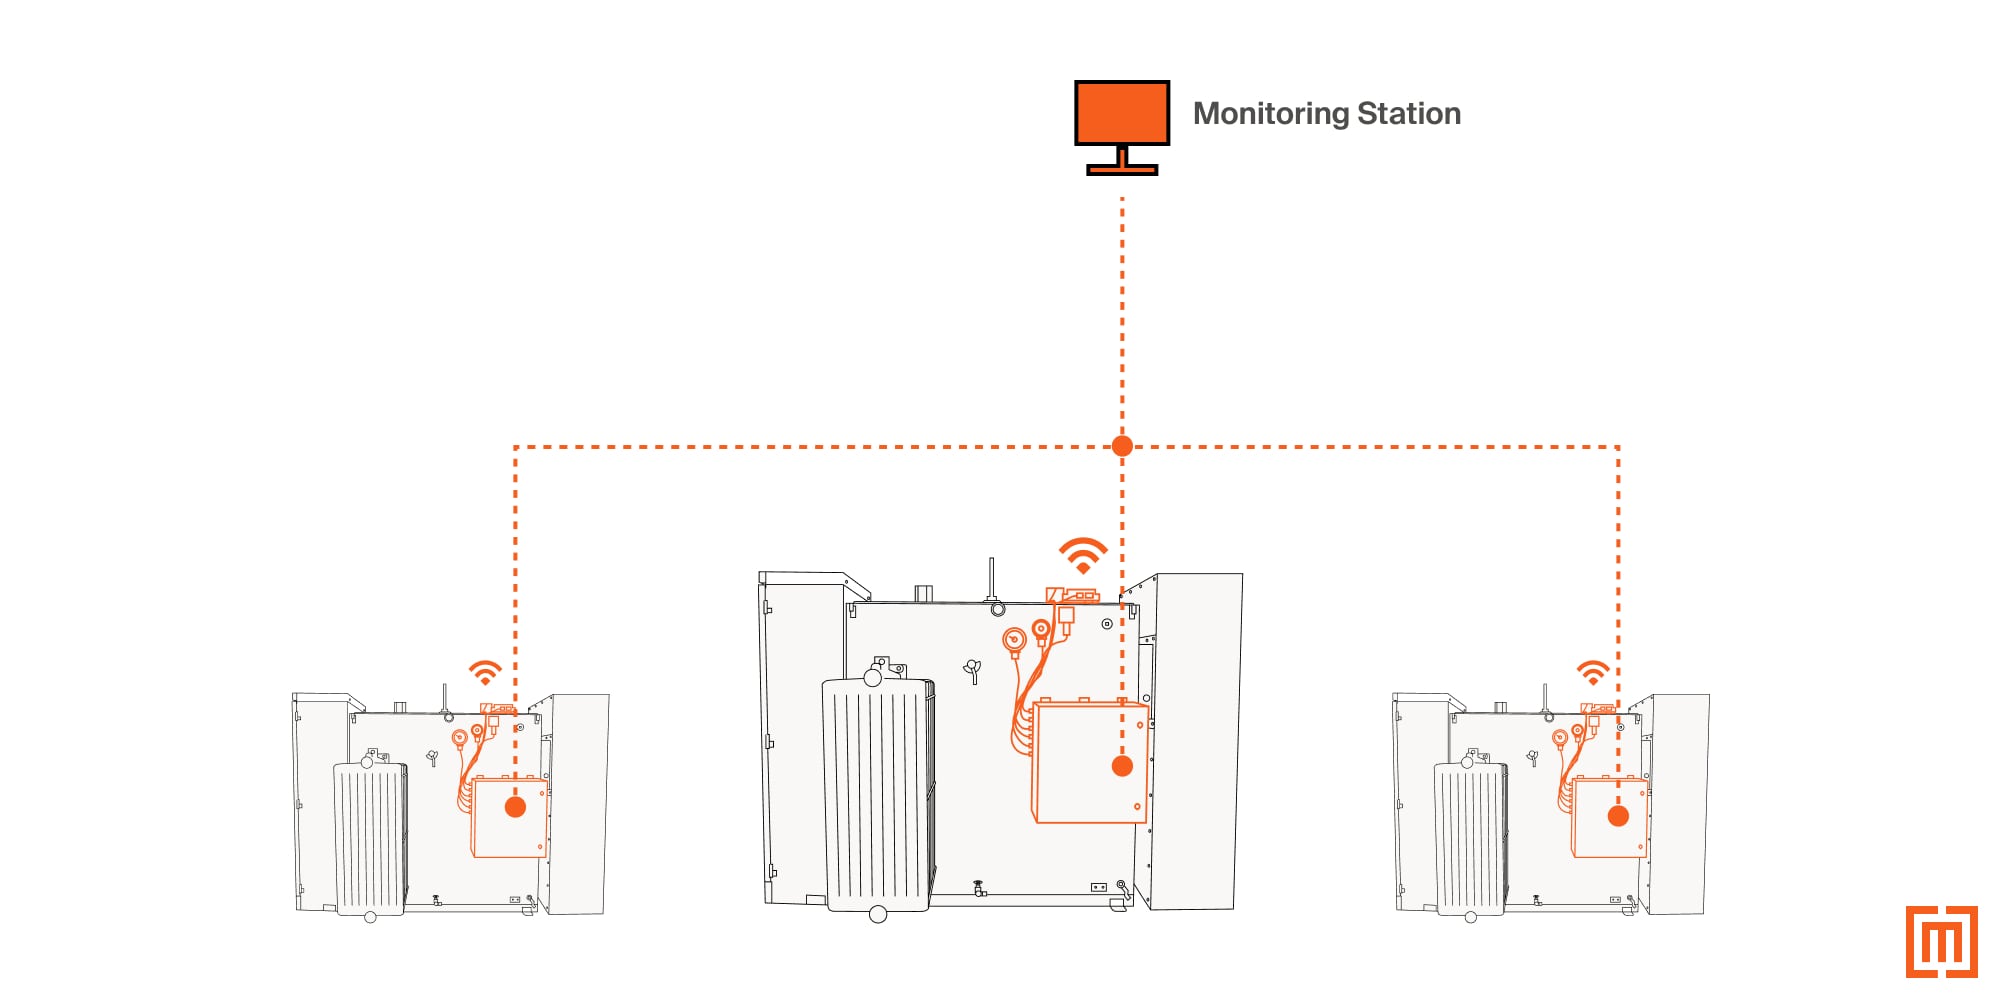 A diagram showing several substation transformers with remote monitoring connected to a monitoring station